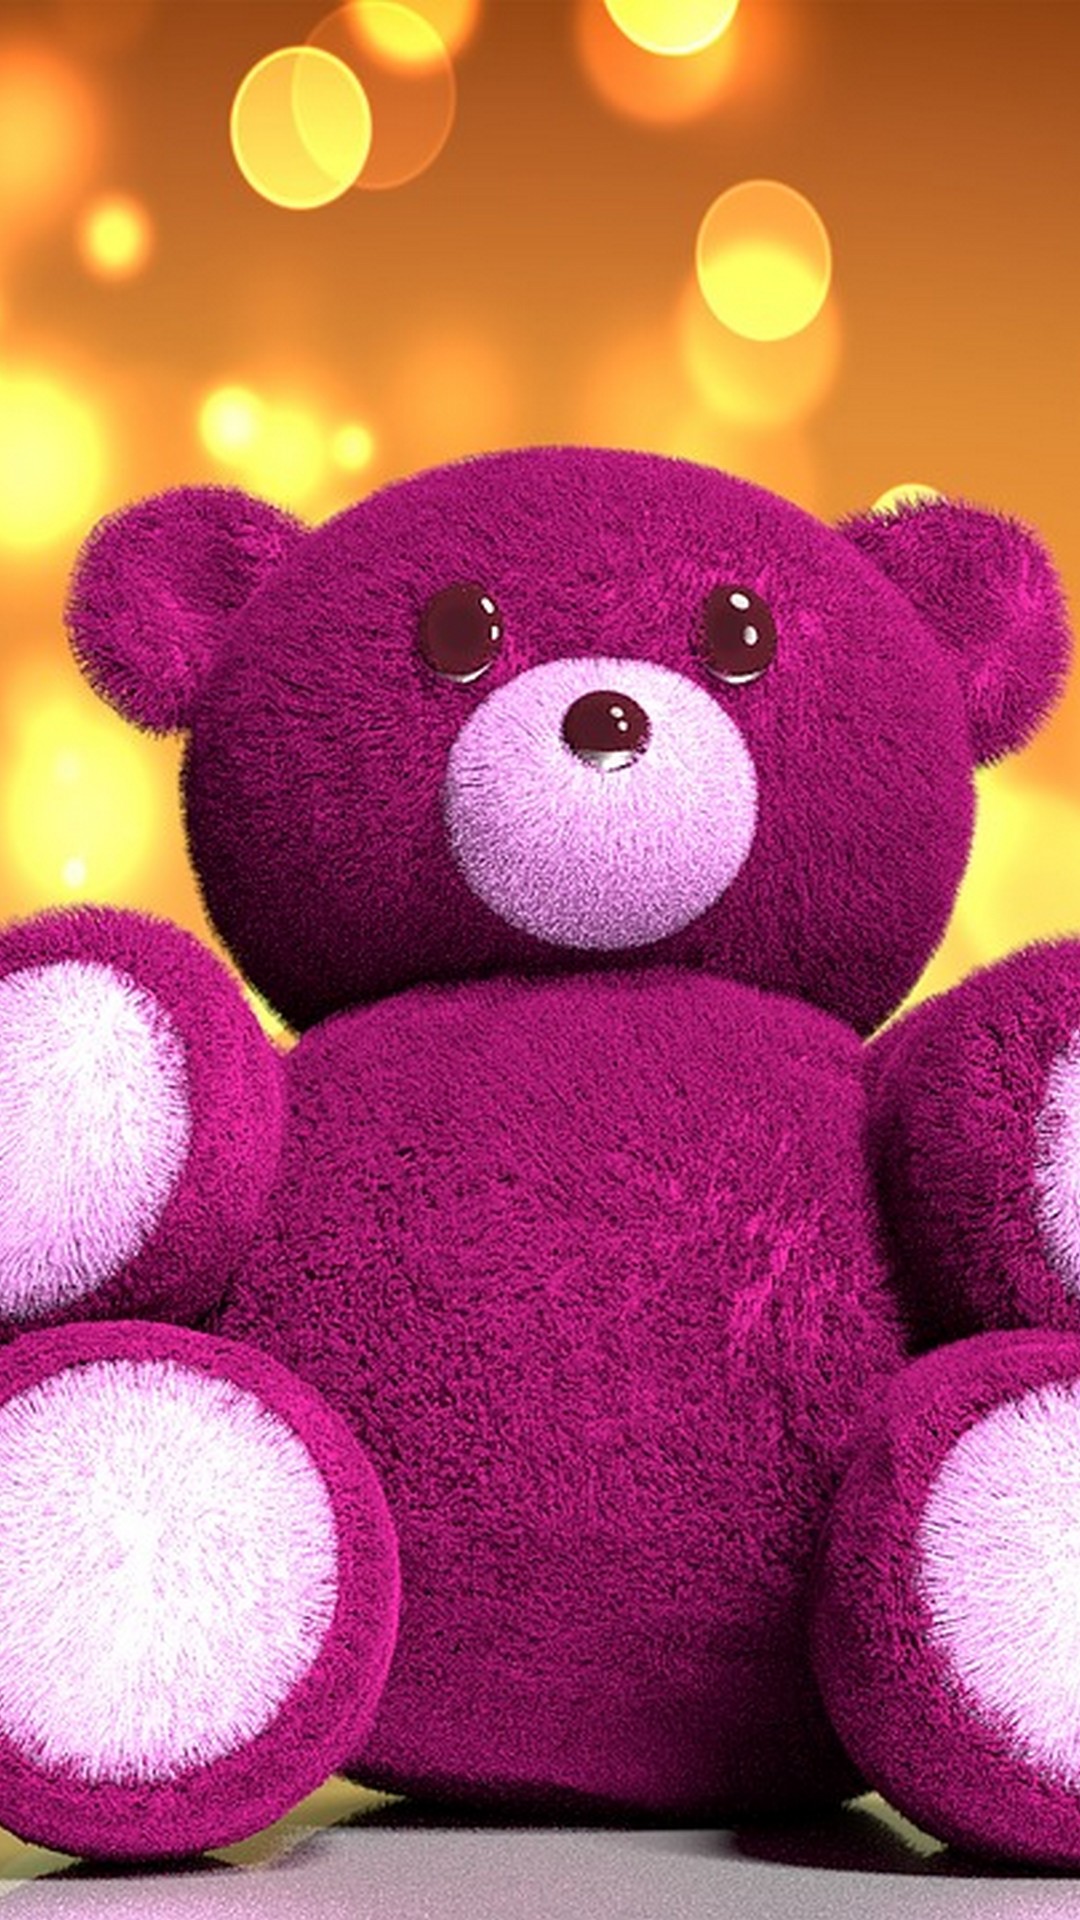 iPhone Wallpaper Giant Teddy Bear with image resolution 1080x1920 pixel. You can make this wallpaper for your iPhone 5, 6, 7, 8, X backgrounds, Mobile Screensaver, or iPad Lock Screen